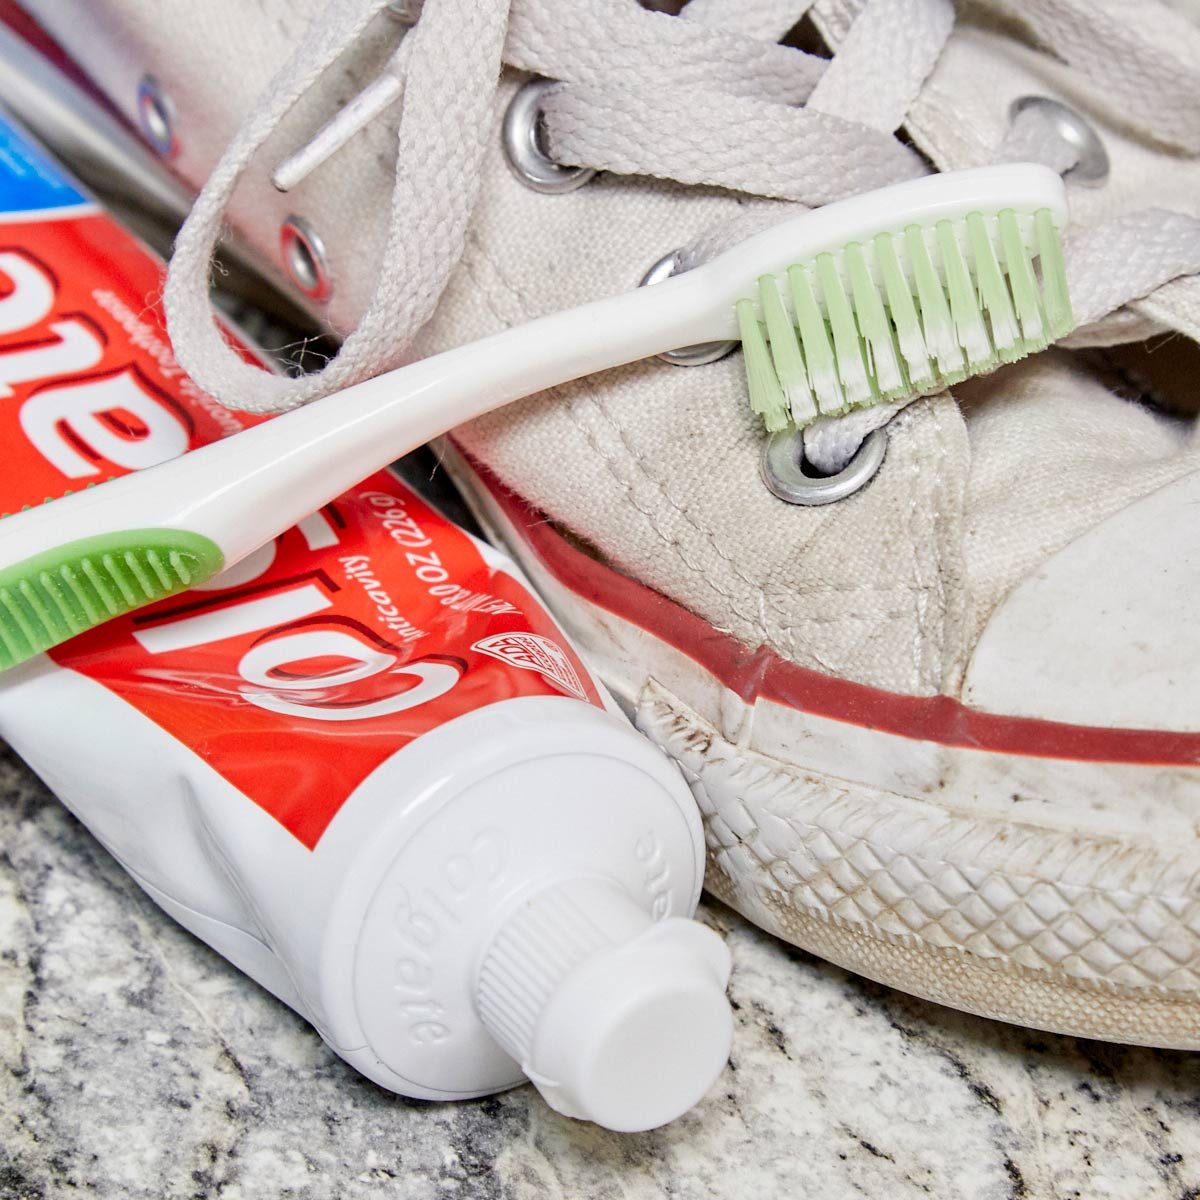 how to clean white vans toothpaste